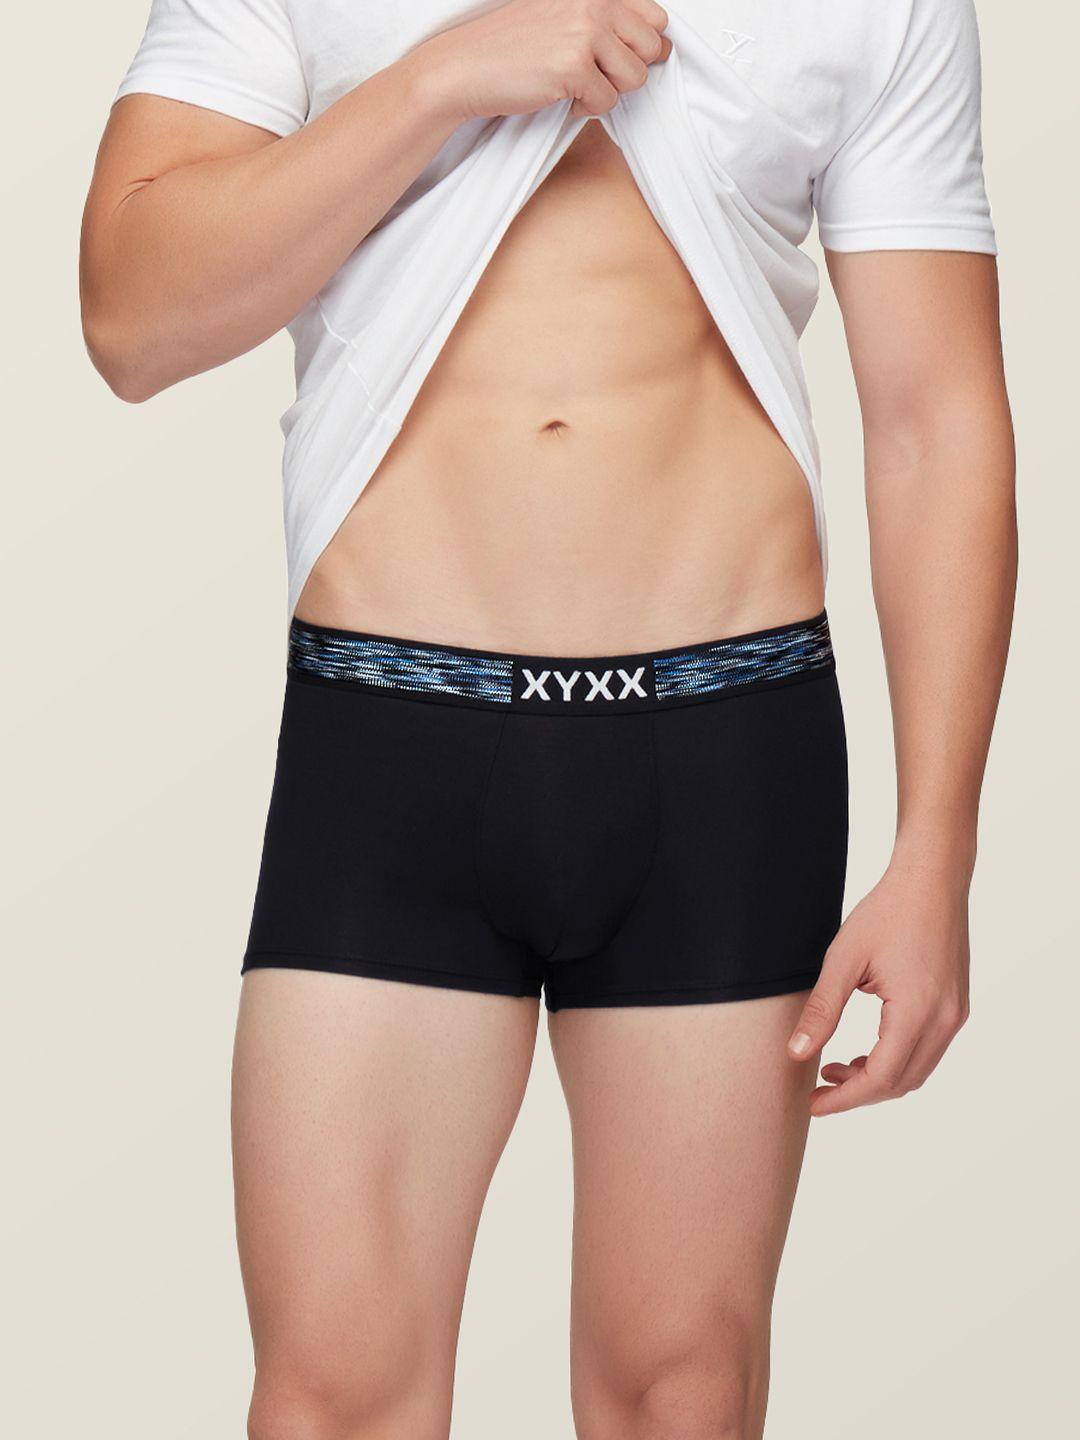 xyxx men black solid intellisoft antimicrobial micro modal hues trunks xytrnk80